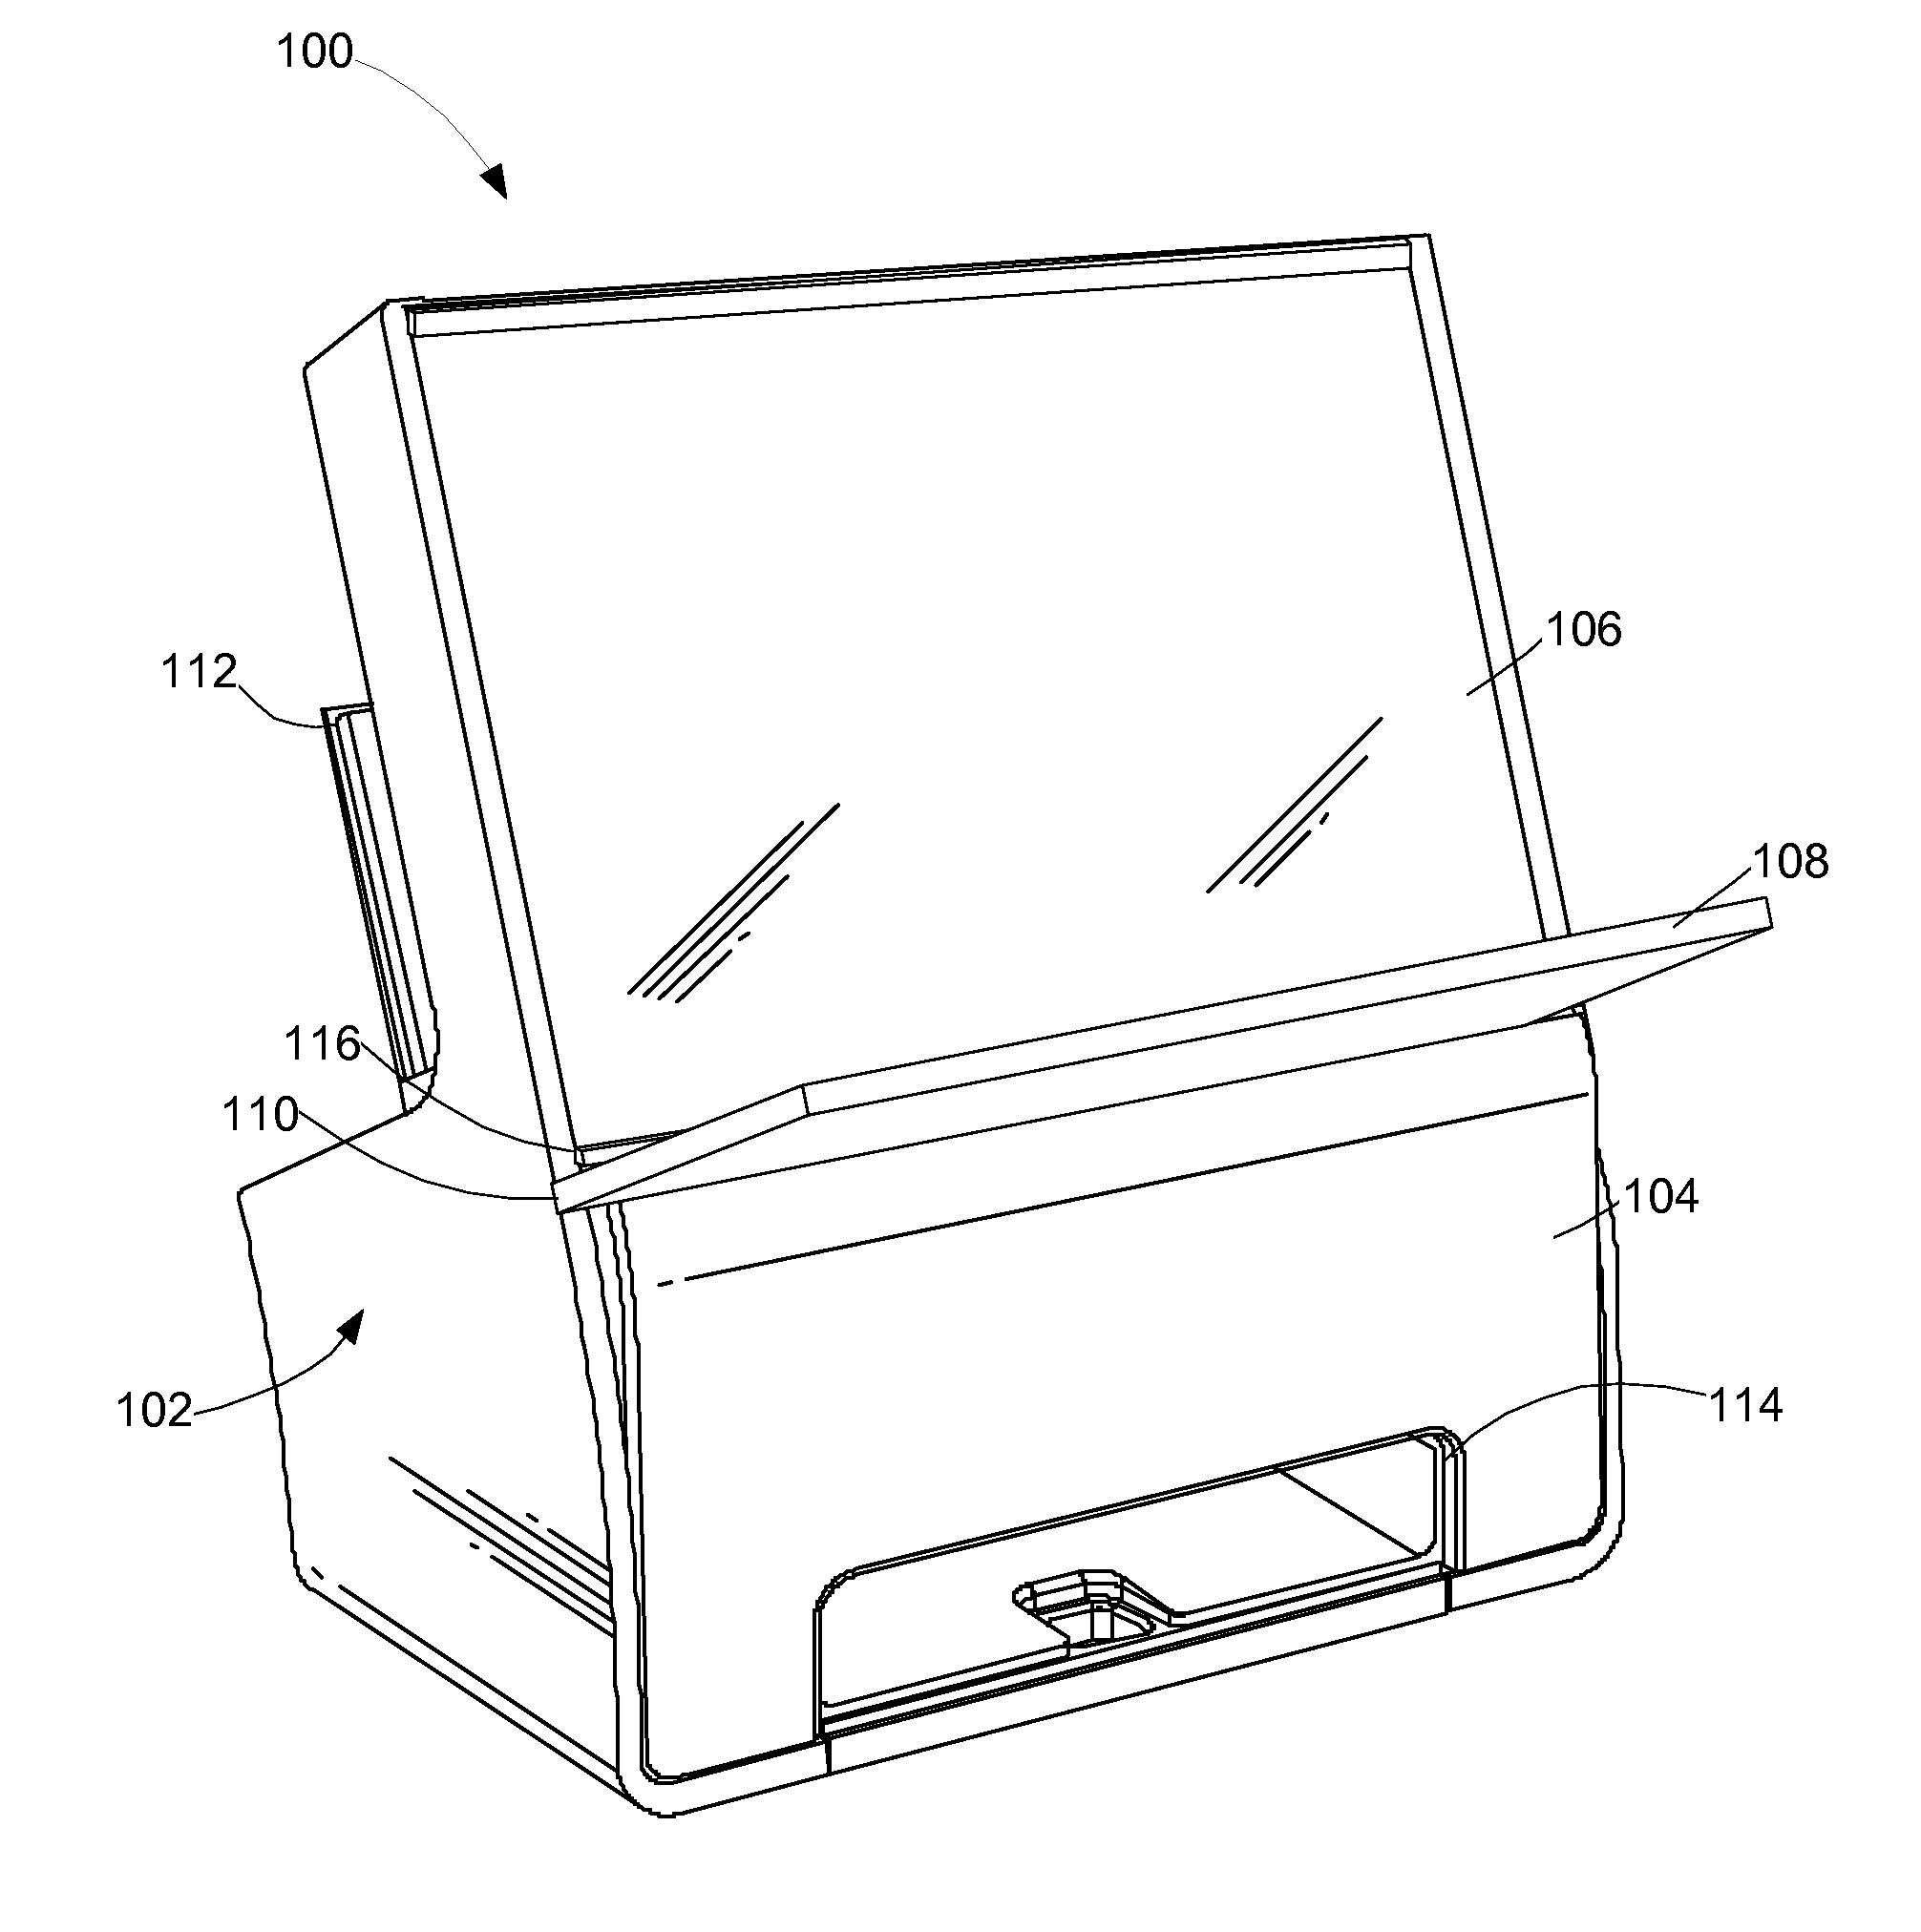 Method and System for Performing an Imaging Function by an Imaging Device